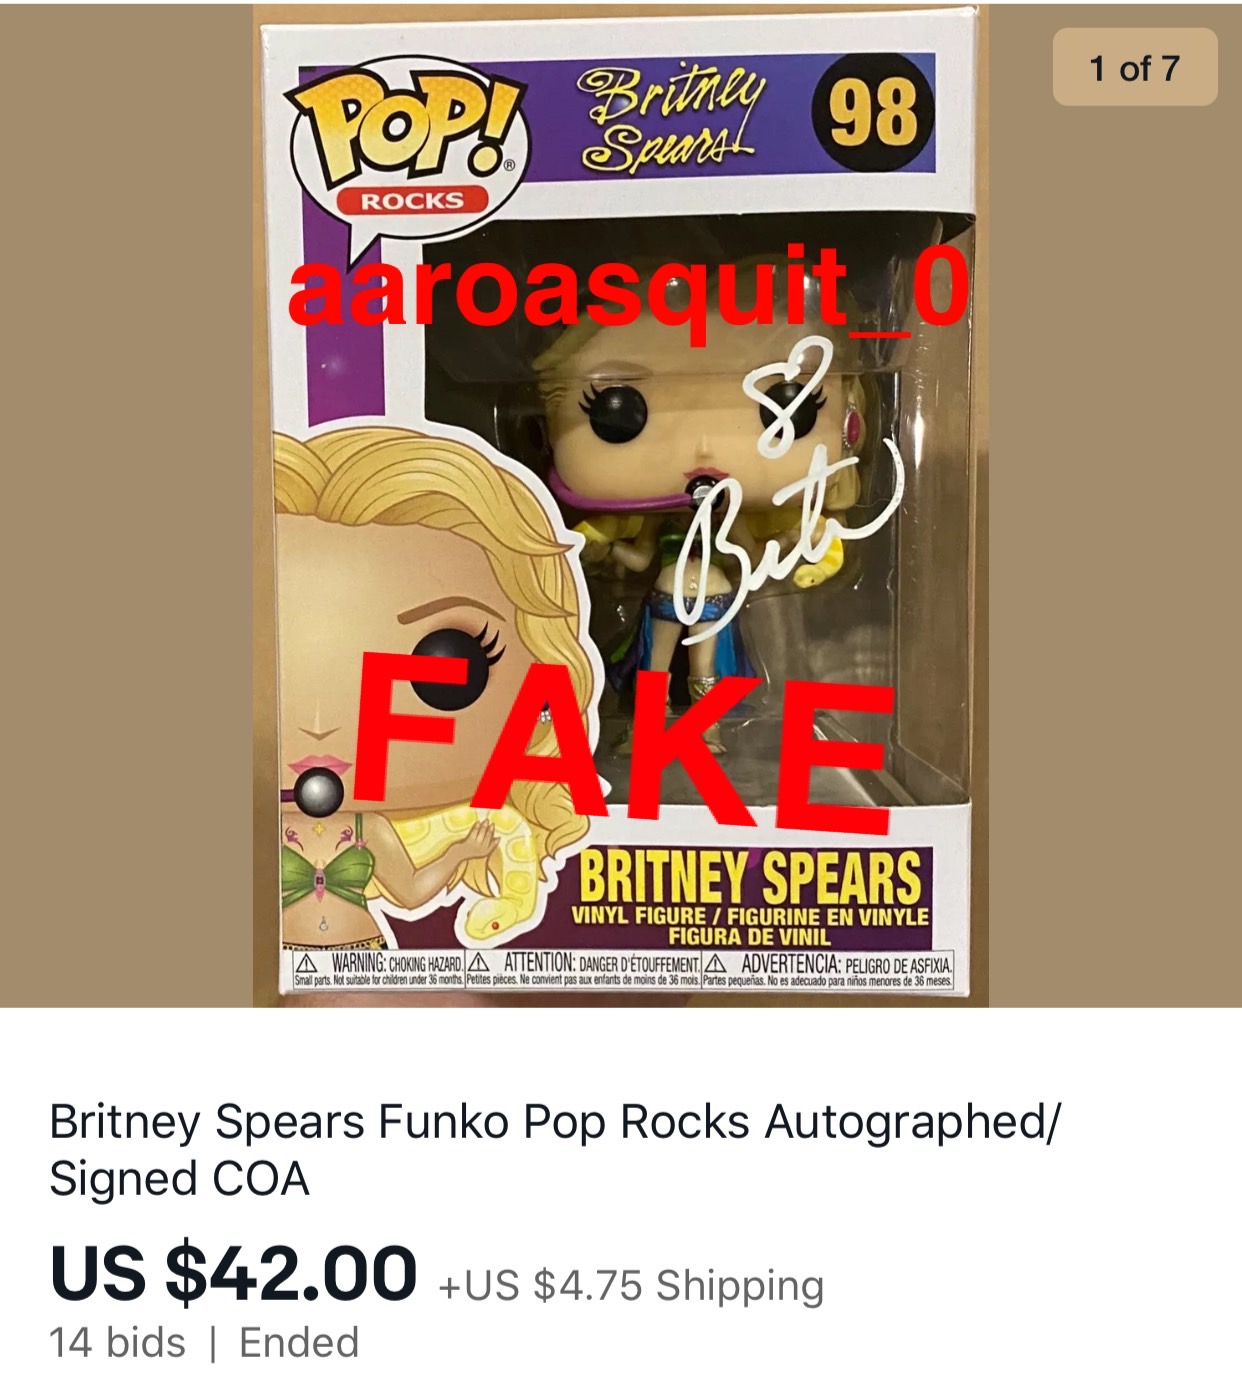 Britney Spears forgery